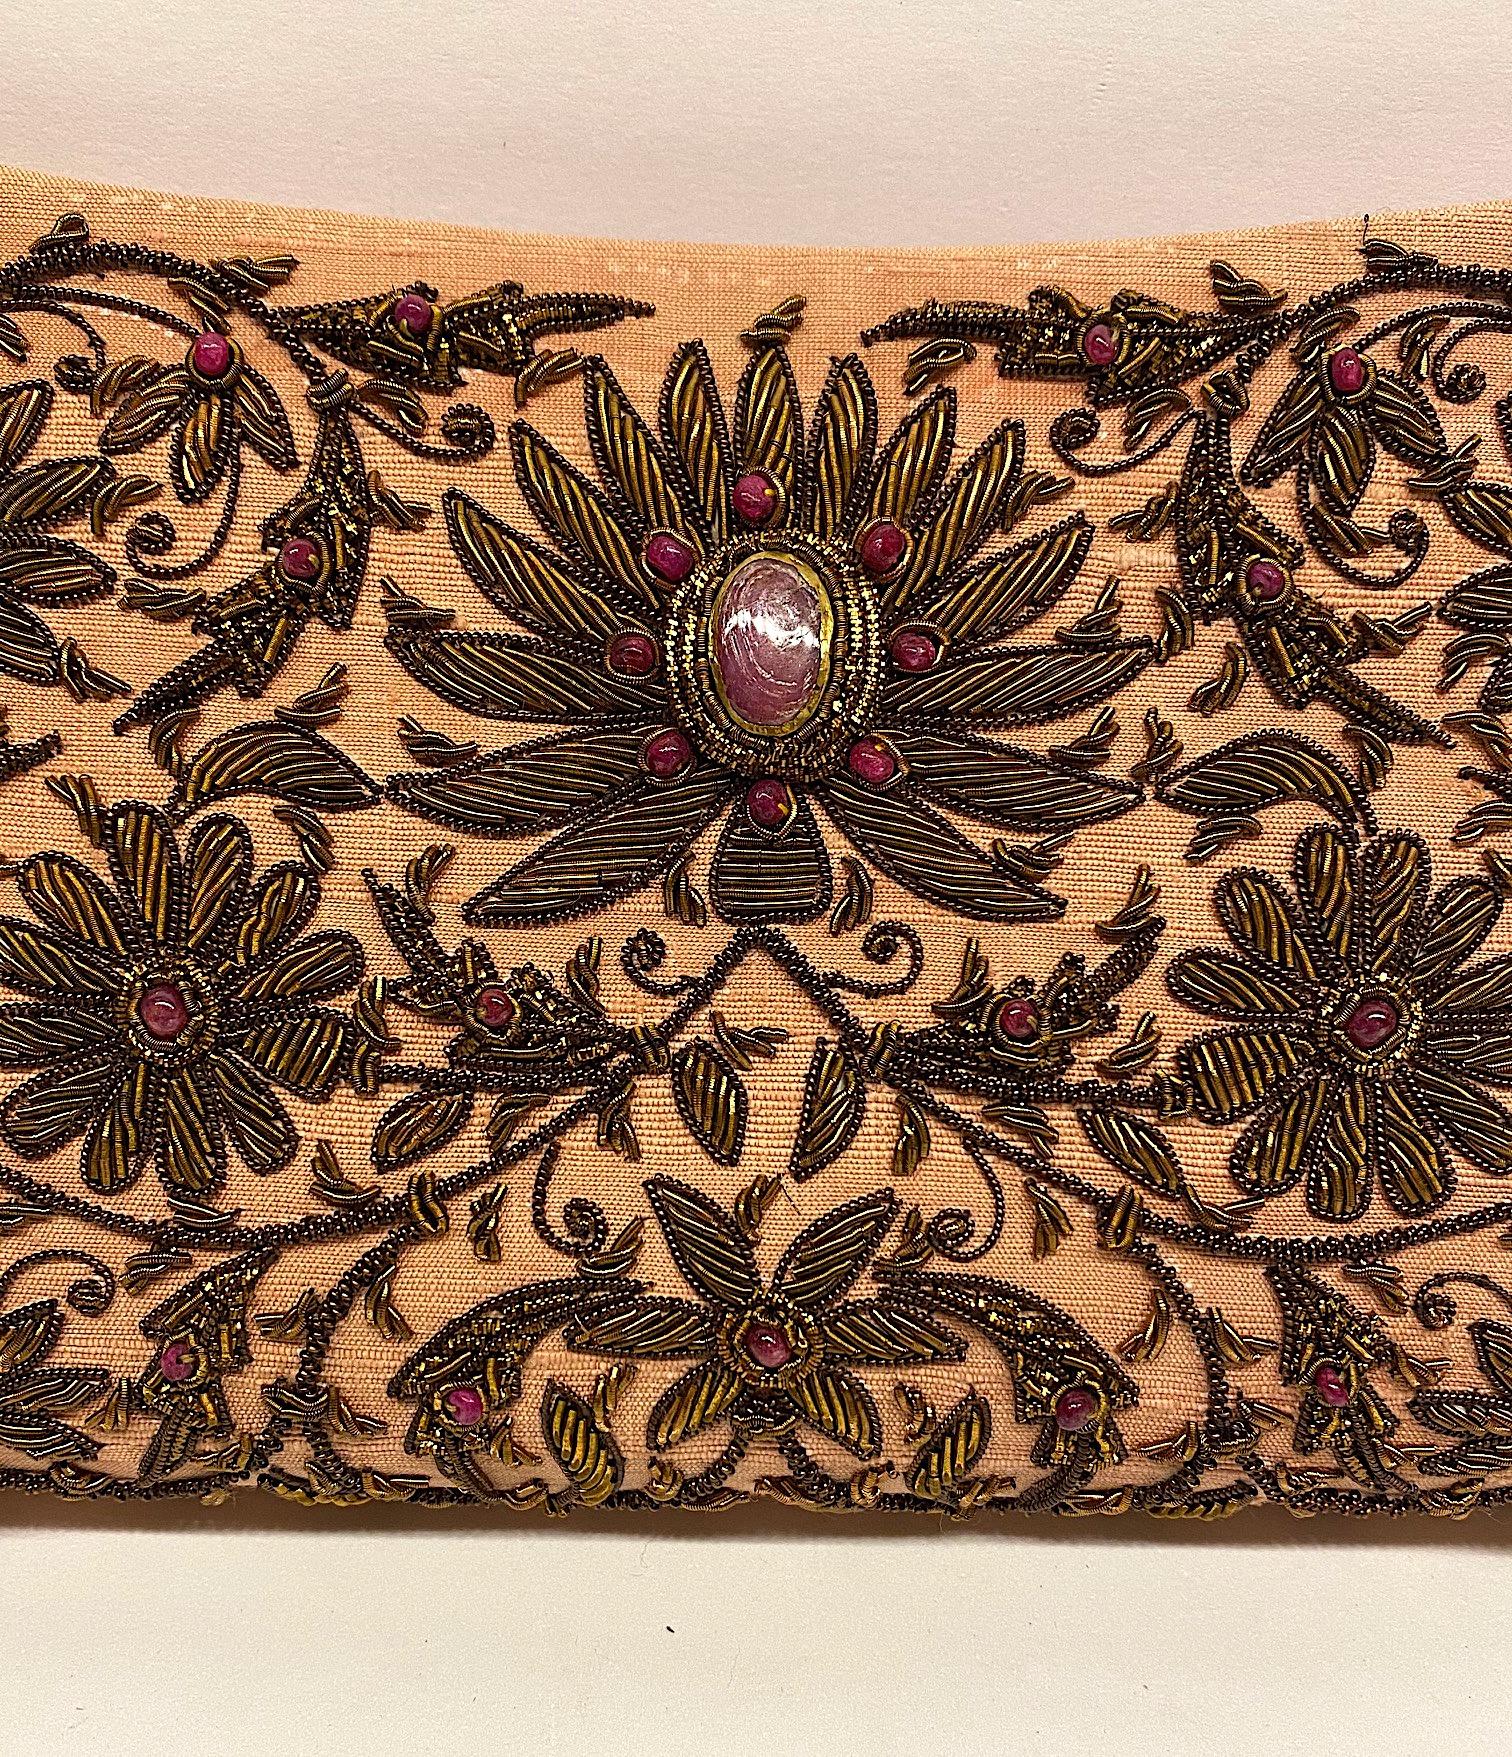 A beautiful and intricate hand embroidered evening bag from India. The use of gold and silver thread and precious jewels in embroidery is known as Zardozi and was once used to embellish the attire of the Kings and the royals in India. A pale pink